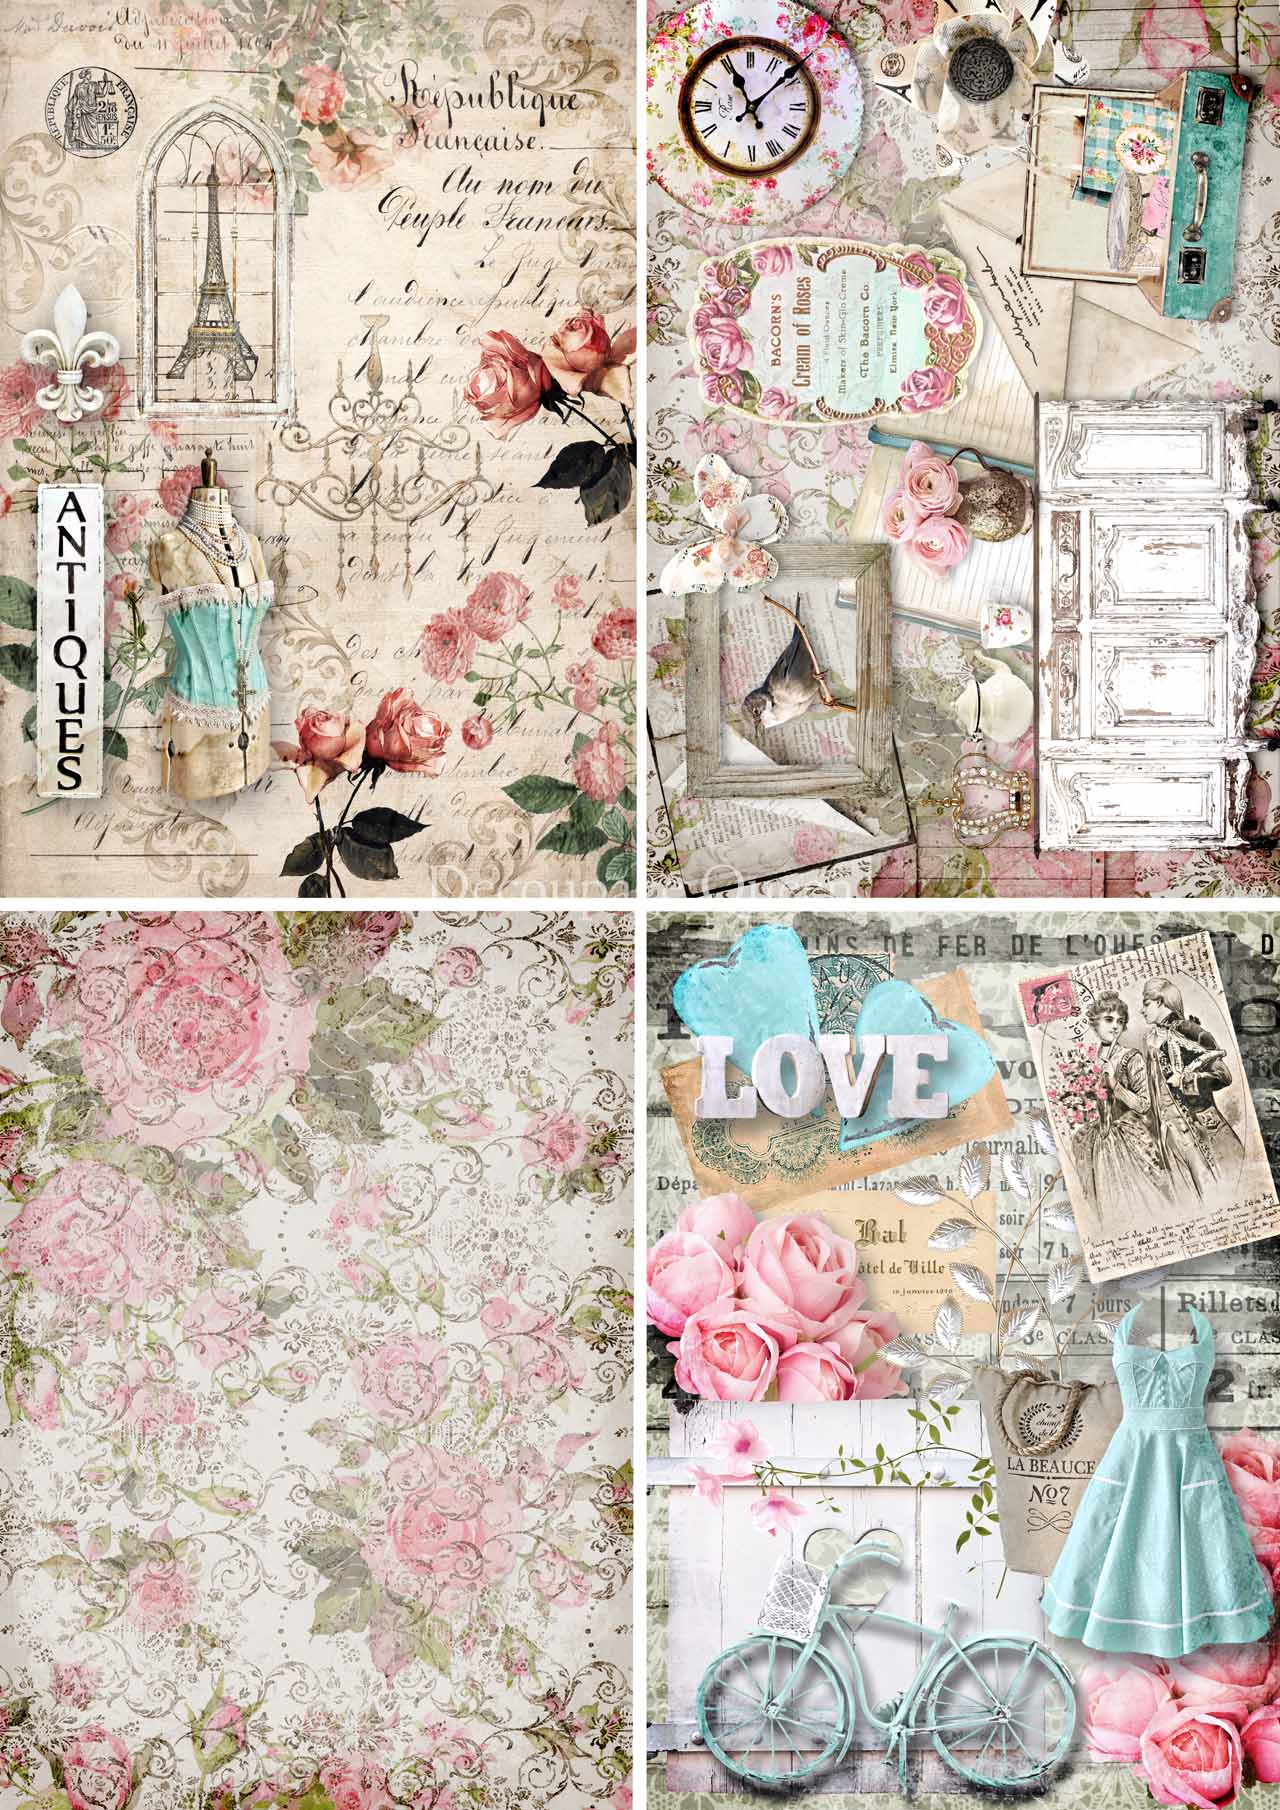 Decoupage Queen Rice Paper Shabby 4 Pack A4